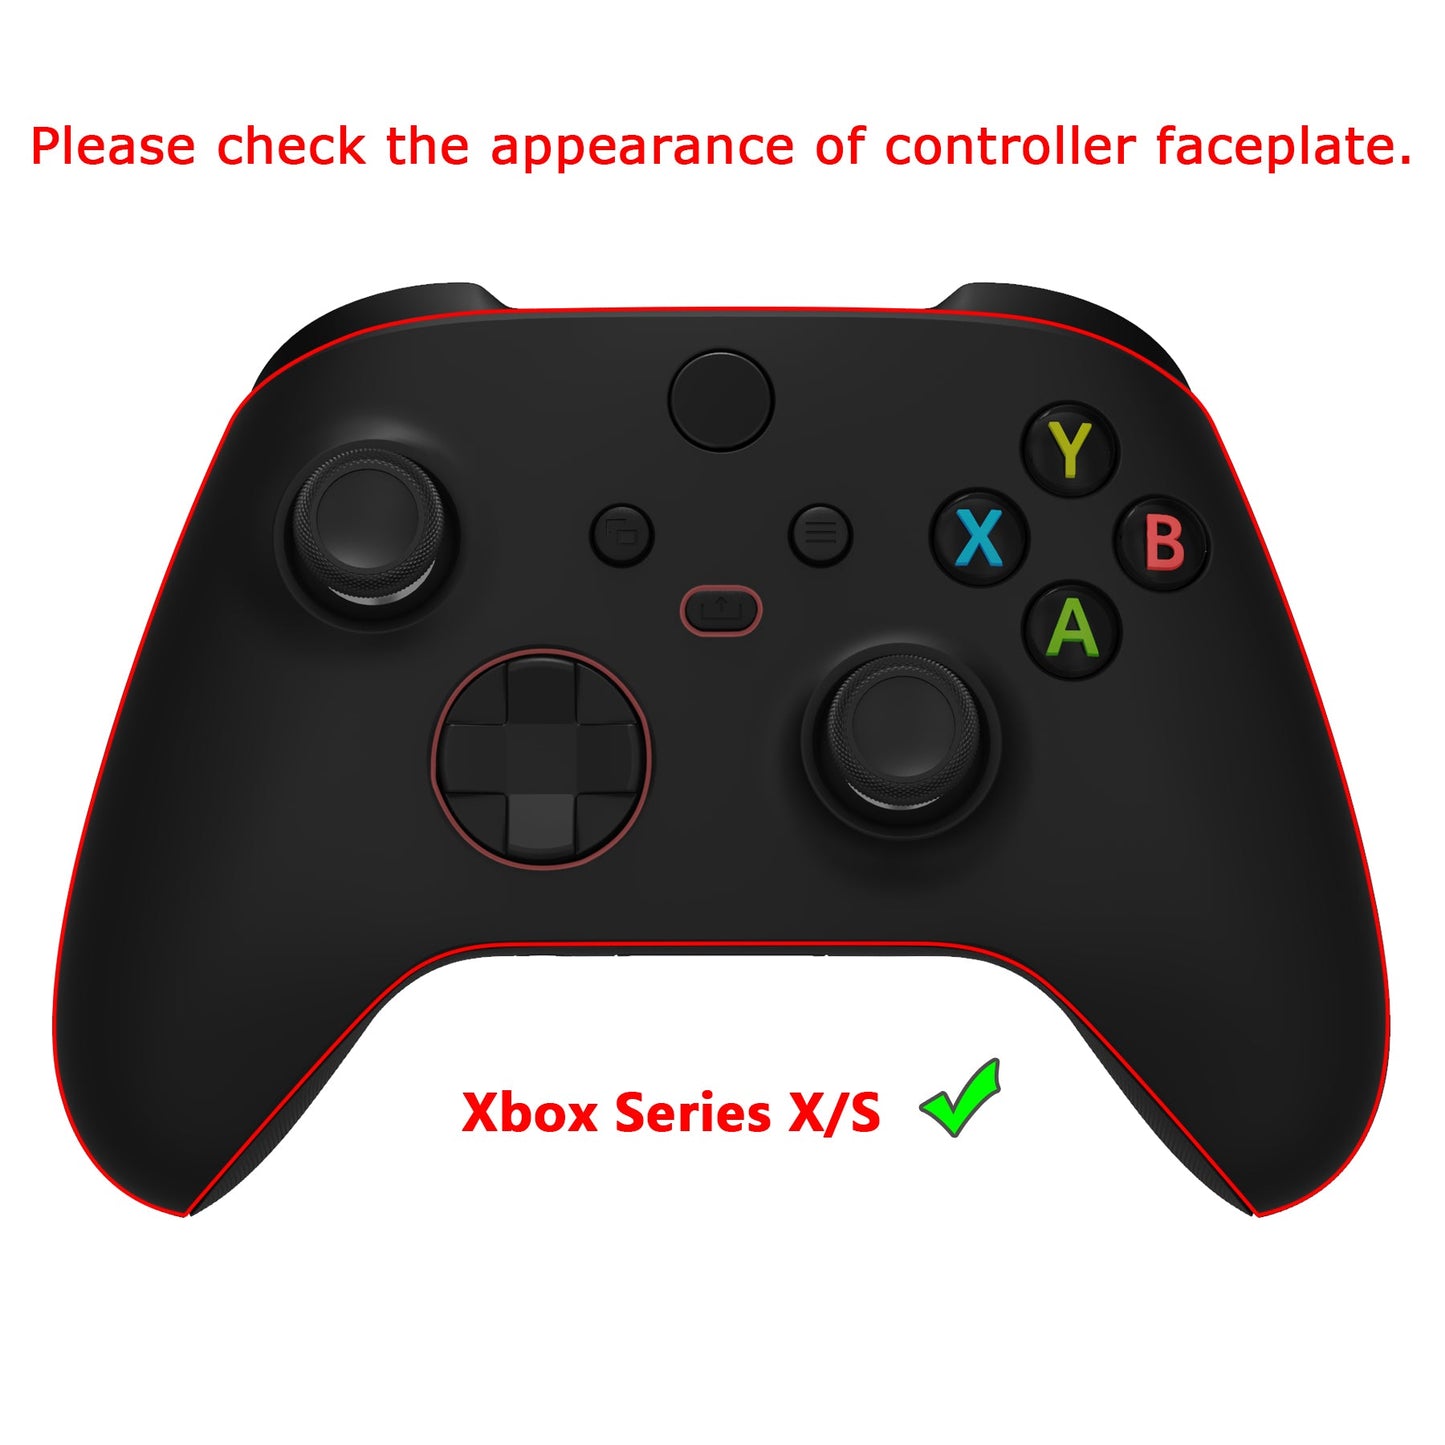 eXtremeRate Retail No Letter Imprint Custom Full Set Buttons for Xbox Series X/S Controller, White Replacement Accessories Bumpers Triggers Dpad ABXY Buttons for Xbox Series X/S, Xbox Core Controller - JX3508